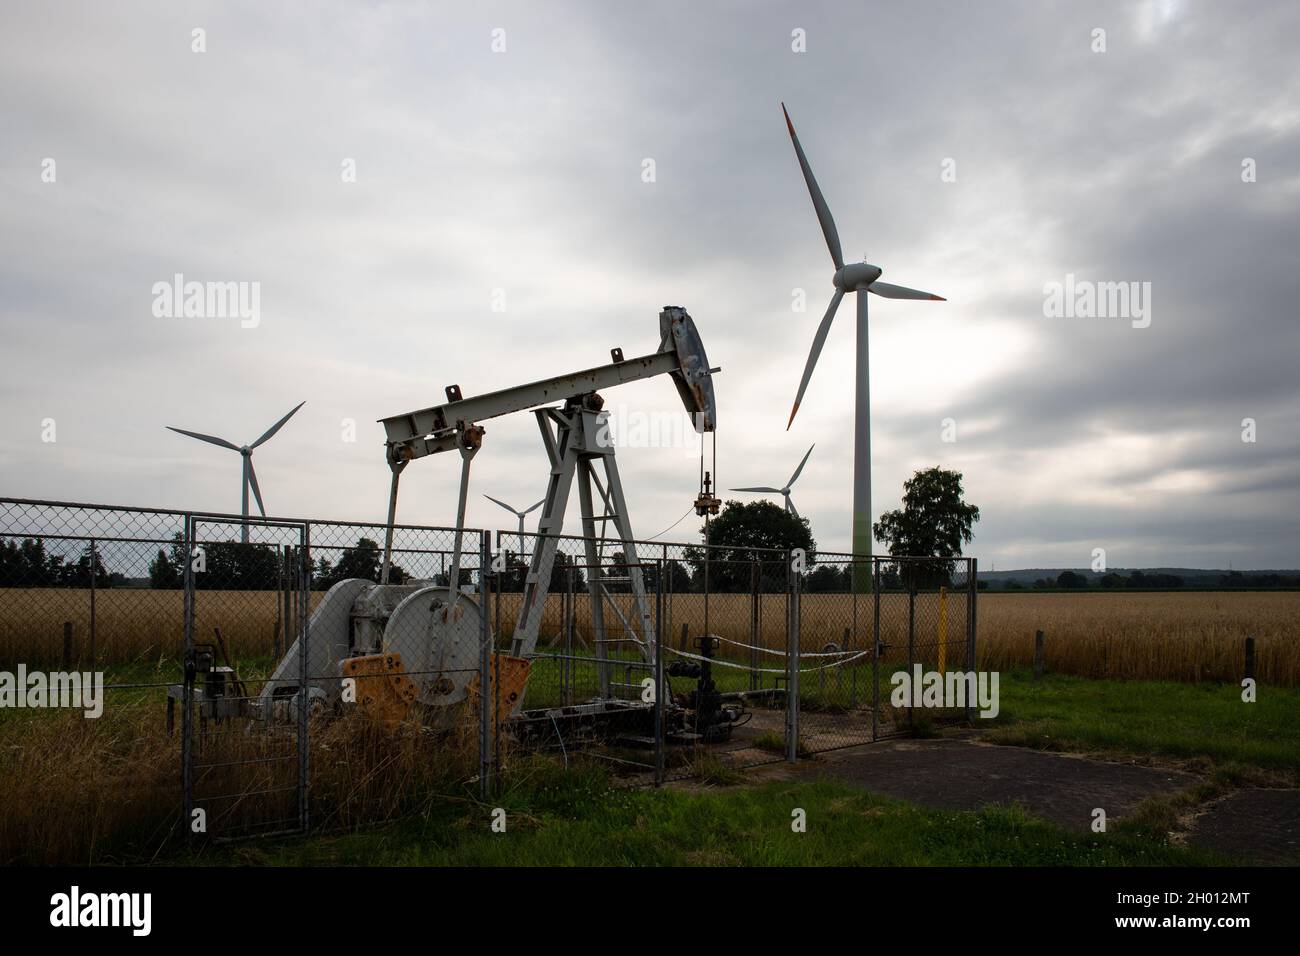 Old rusty oil hauling machines in front of modern wind turbines symbolizing energy transition at the face of climate change Stock Photo